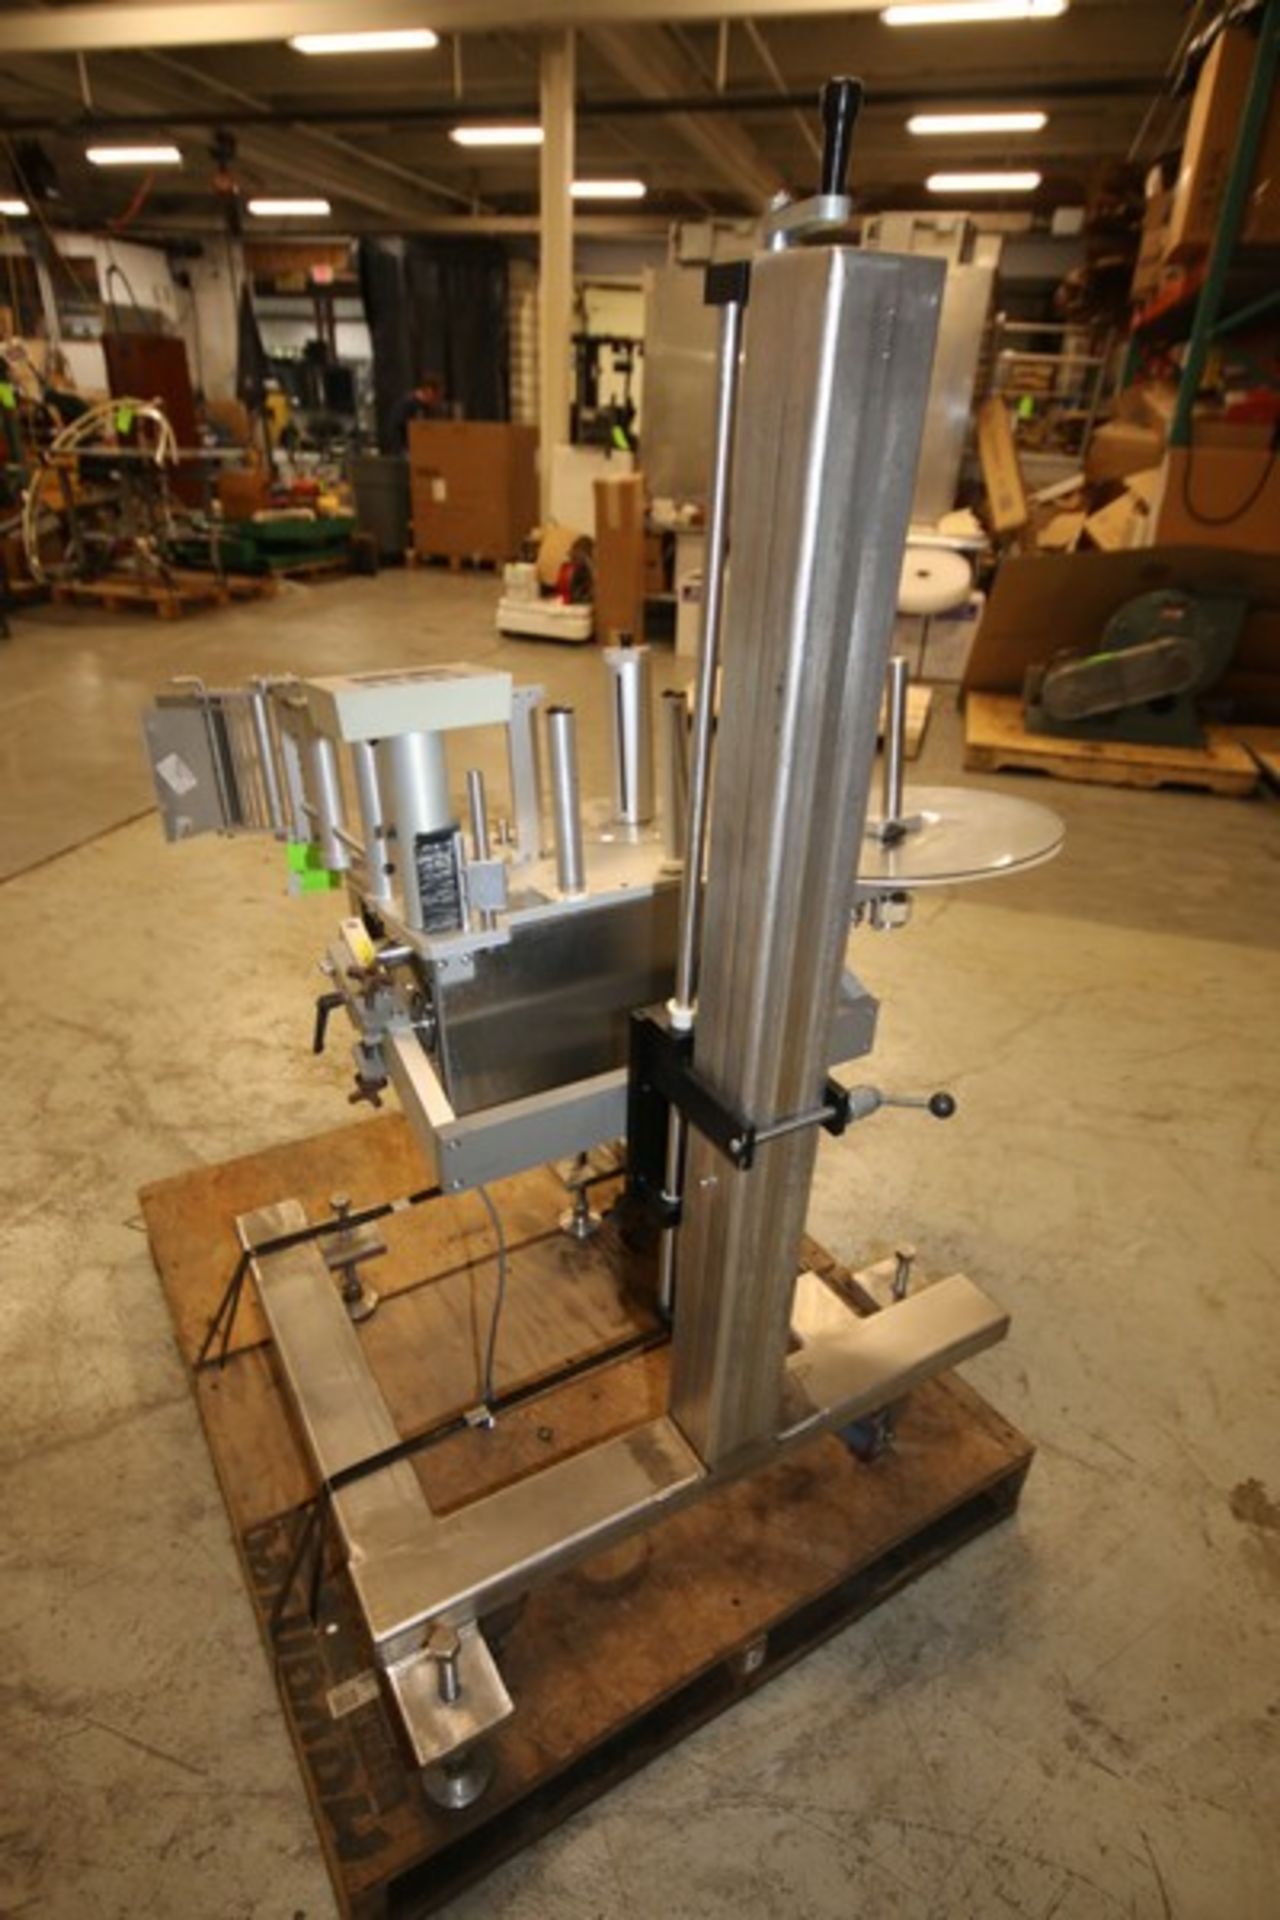 Label-Aire Portable Labeler, Model 3115NV 7"/16" RH 16" UNWD, SN 0335301111, 120V, Mounted on S/S - Image 5 of 8